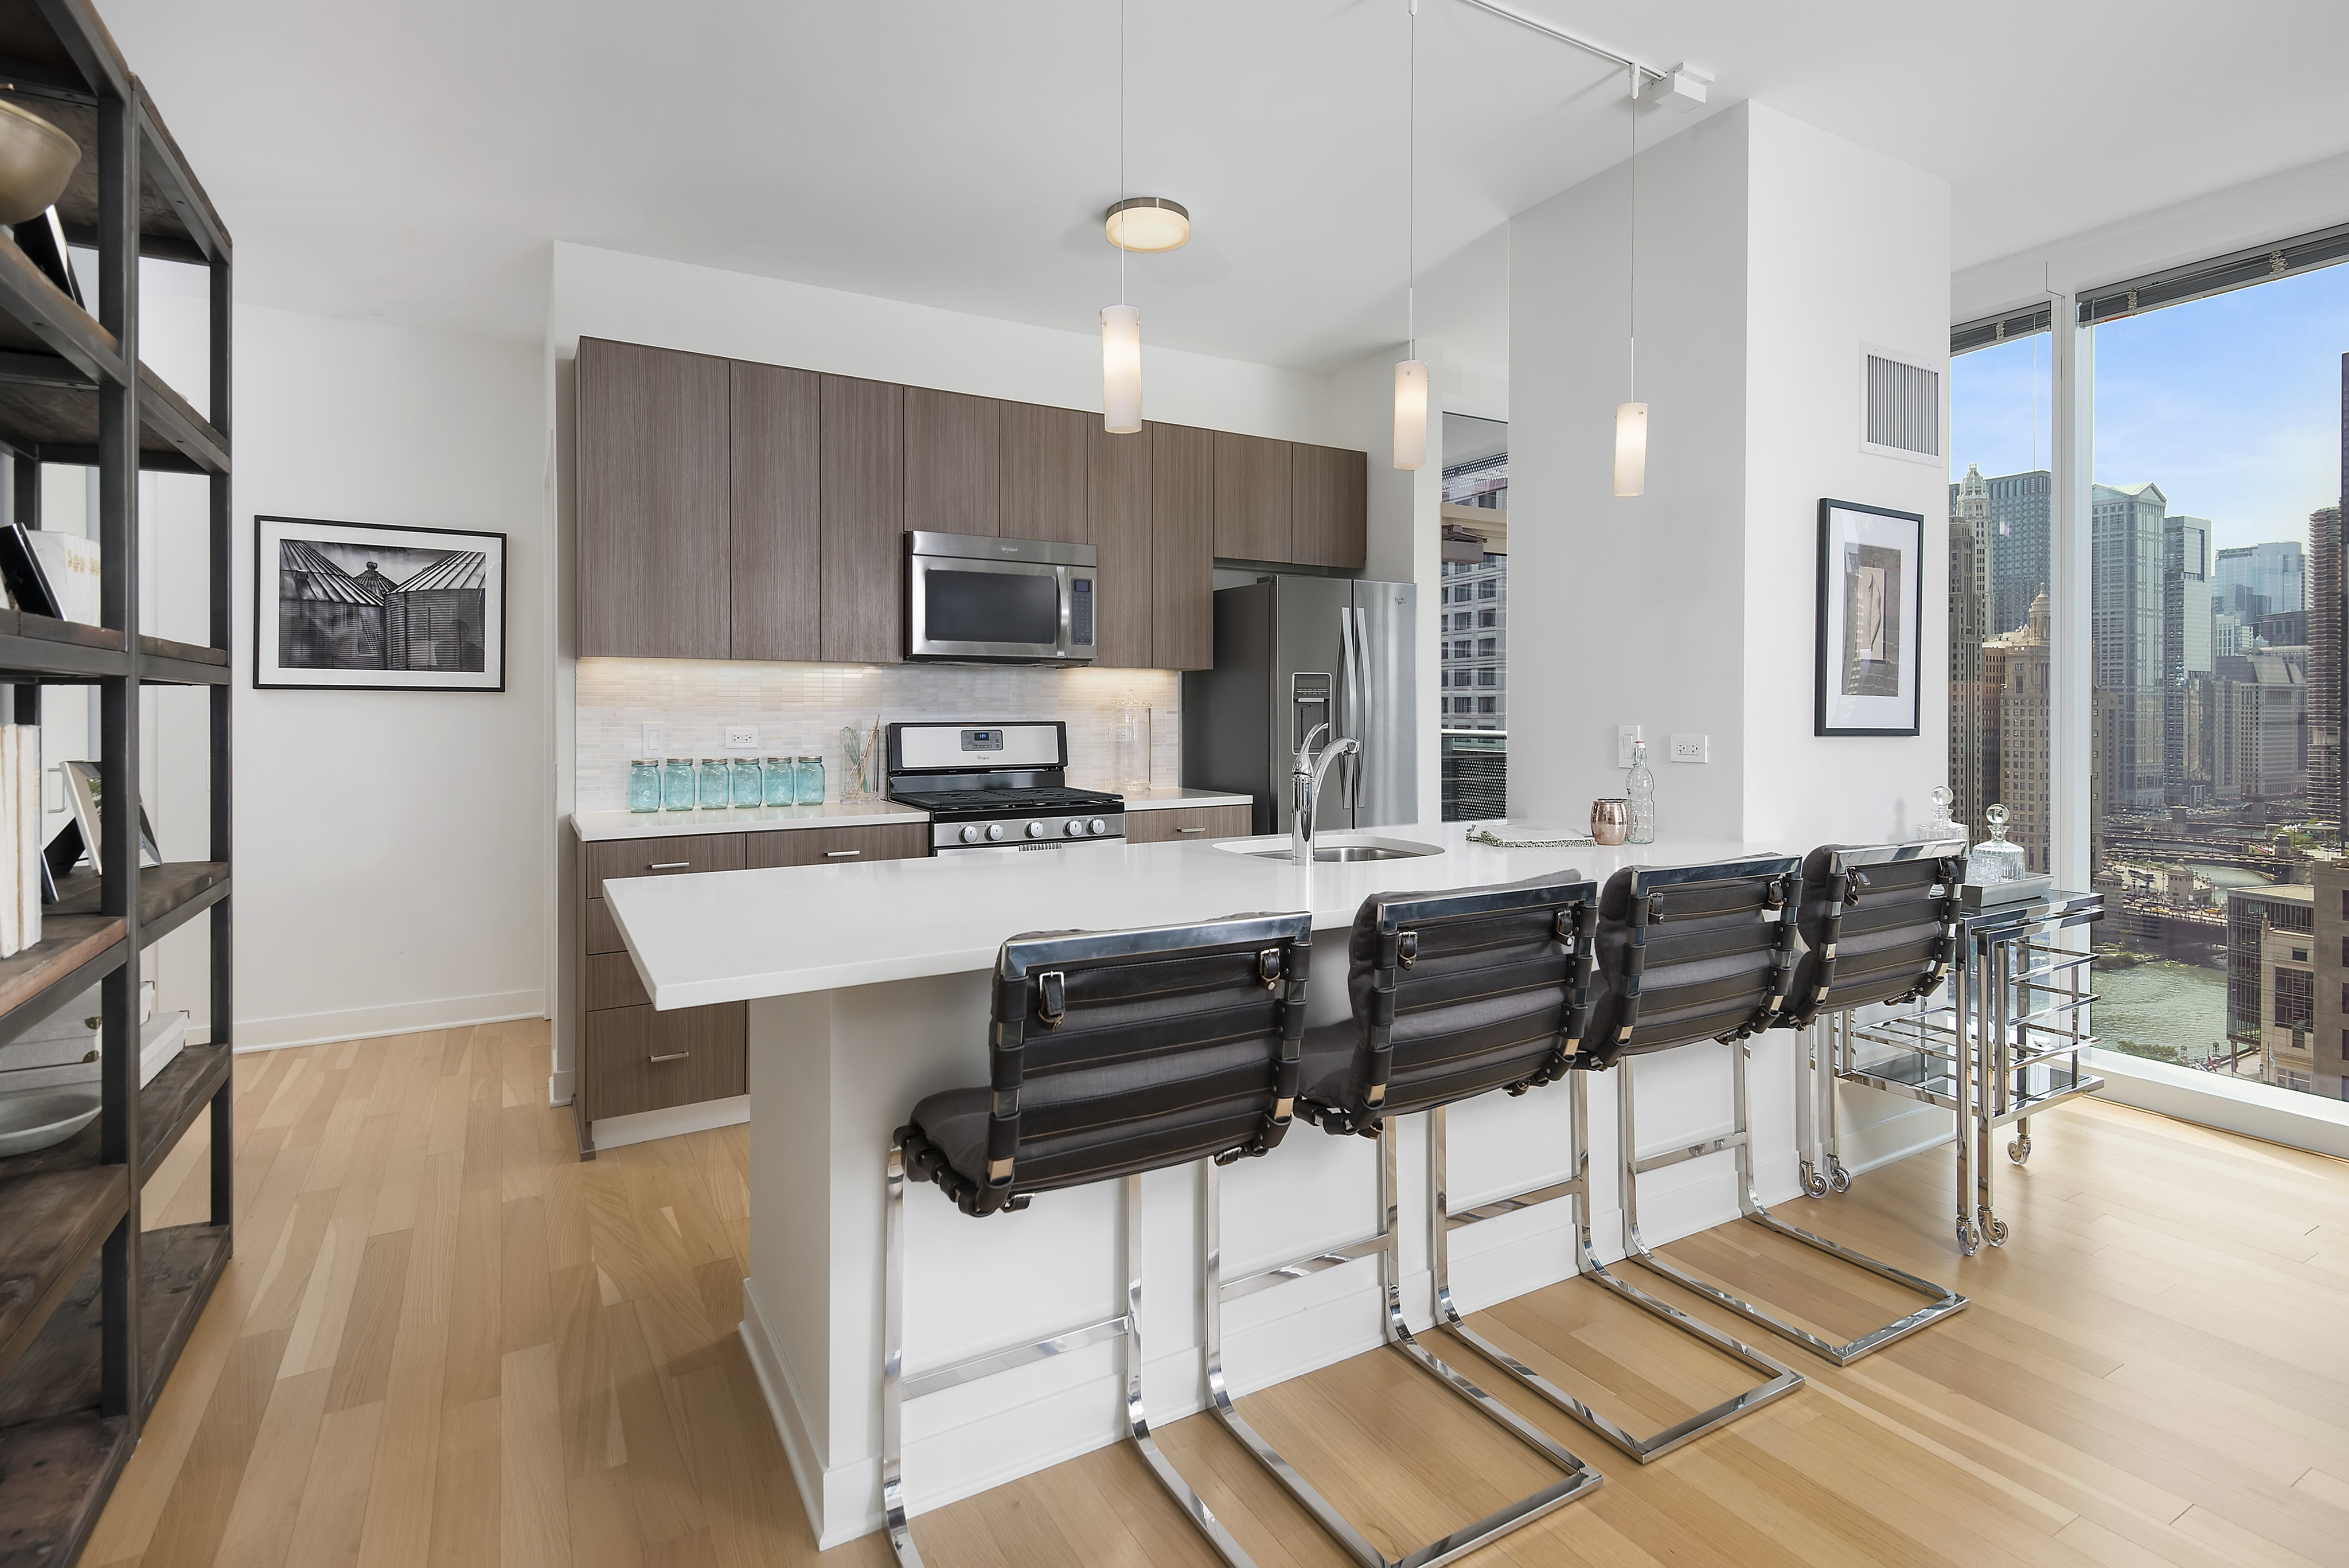 Model kitchen with stainless steel appliances, an island, quartzite stone countertops, wood flooring, and floor-to-ceiling windows with a city view